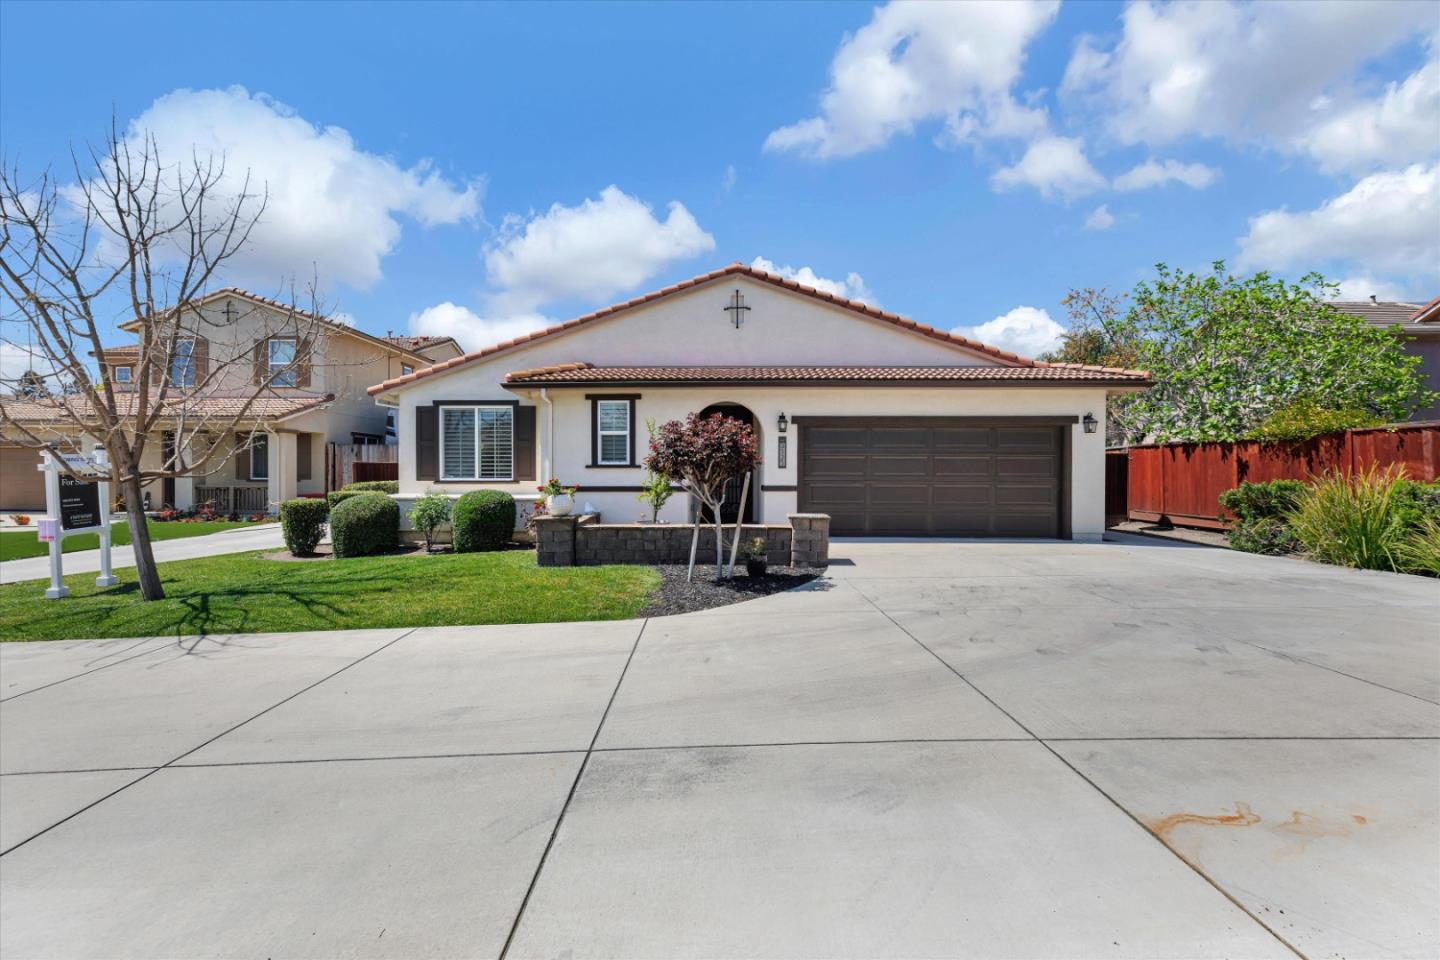 Photo of 9525 Canyon Ct in Gilroy, CA